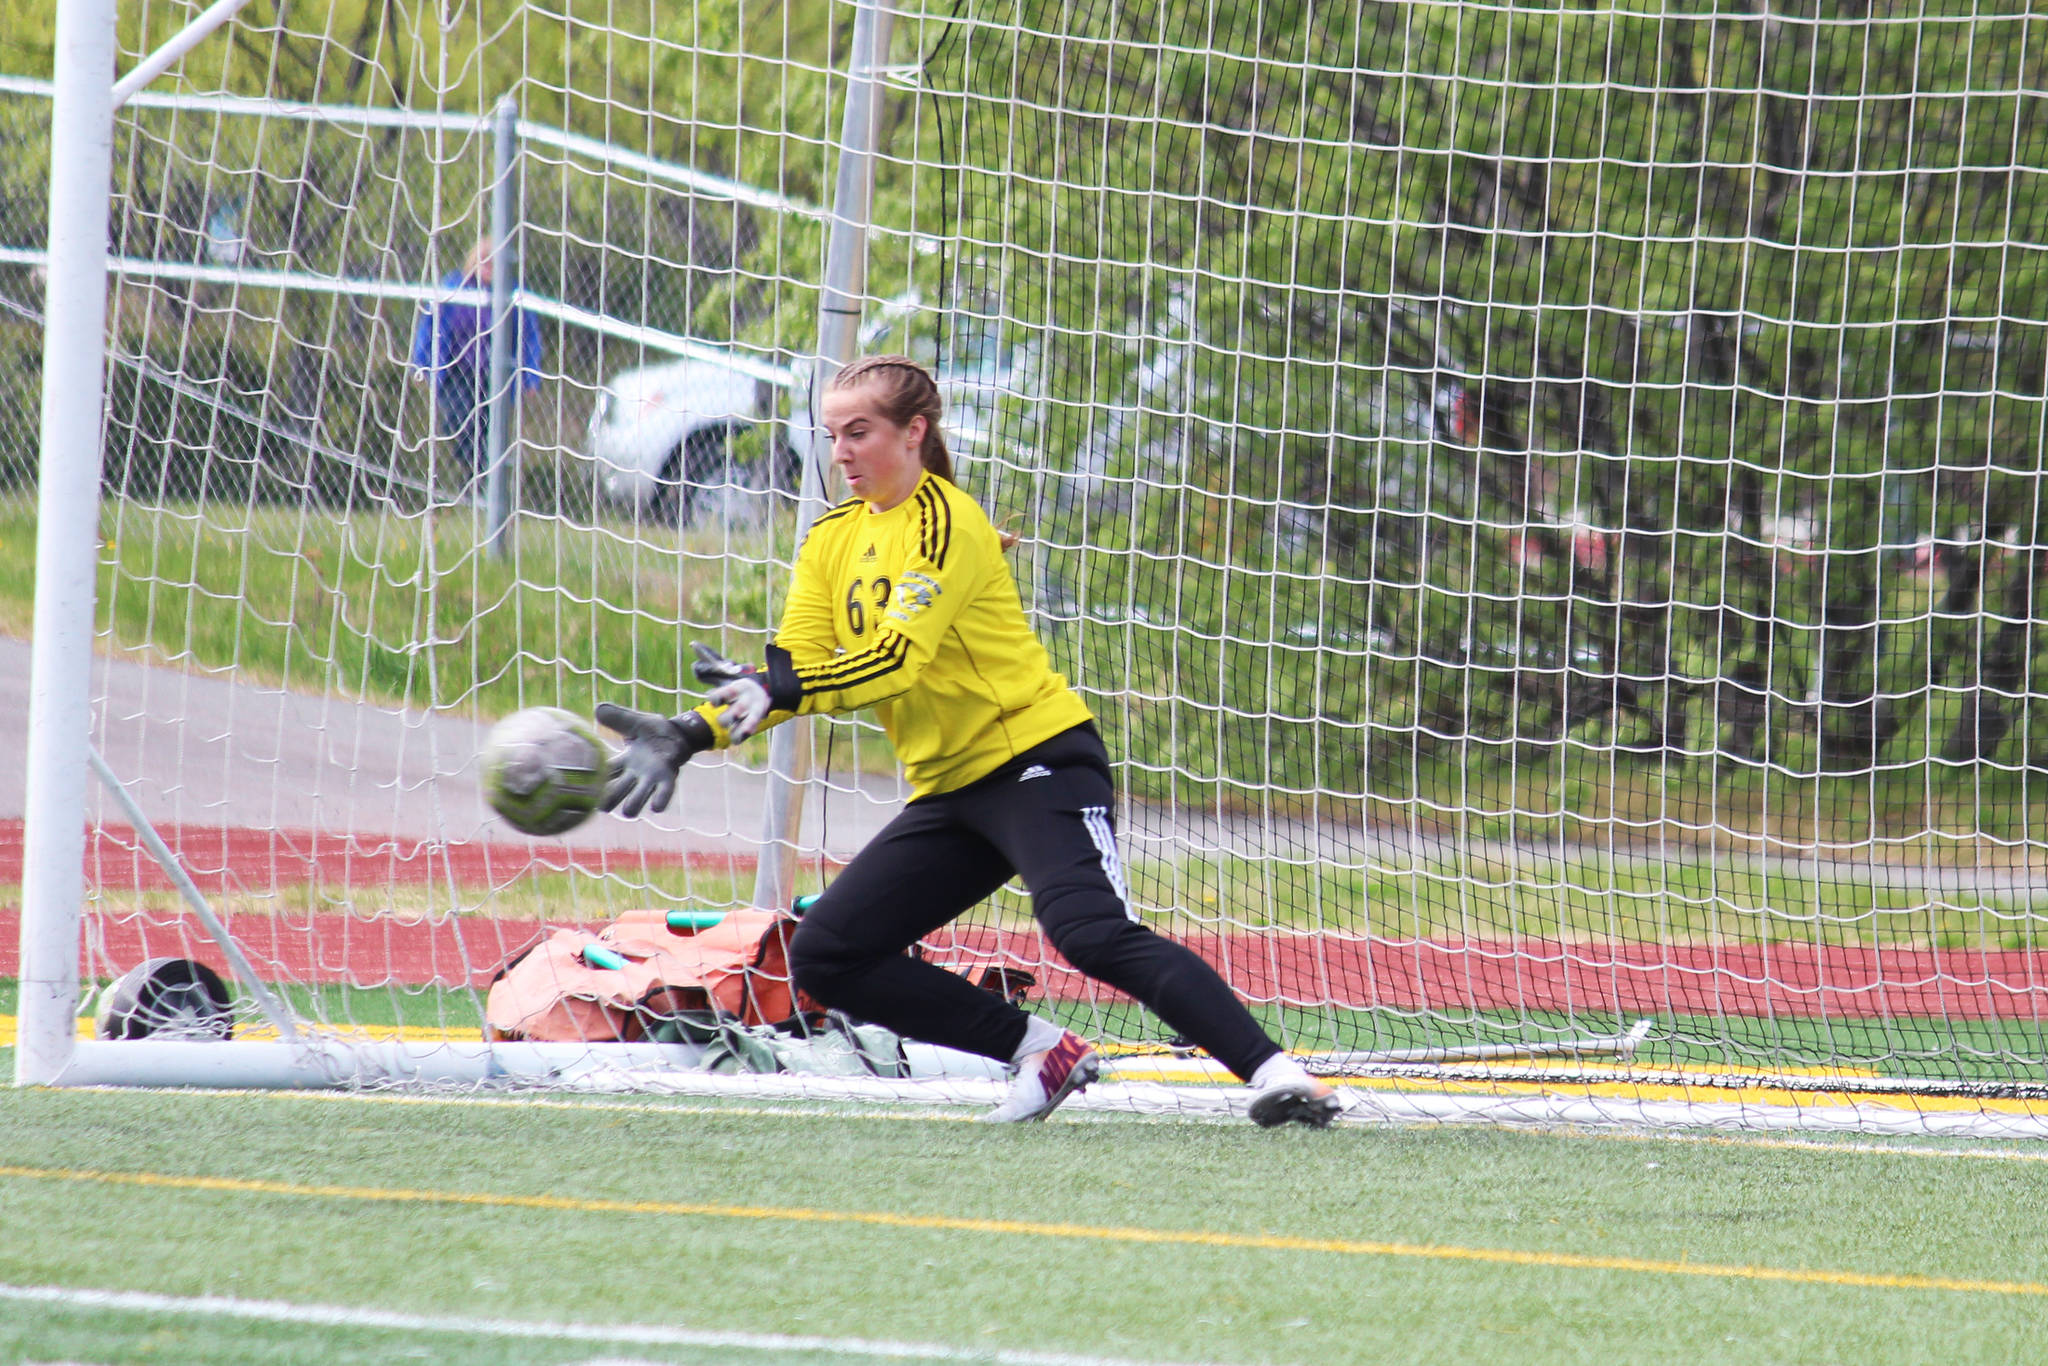 Thunder Mountain goalkeeper Samantha Dilley makes a save on a penalty kick from Soldotna during a semifinal game of the Division II state soccer championships on Friday, May 24, 2019 at Service High School in Anchorage, Alaska. (Photo by Megan Pacer/Homer News)